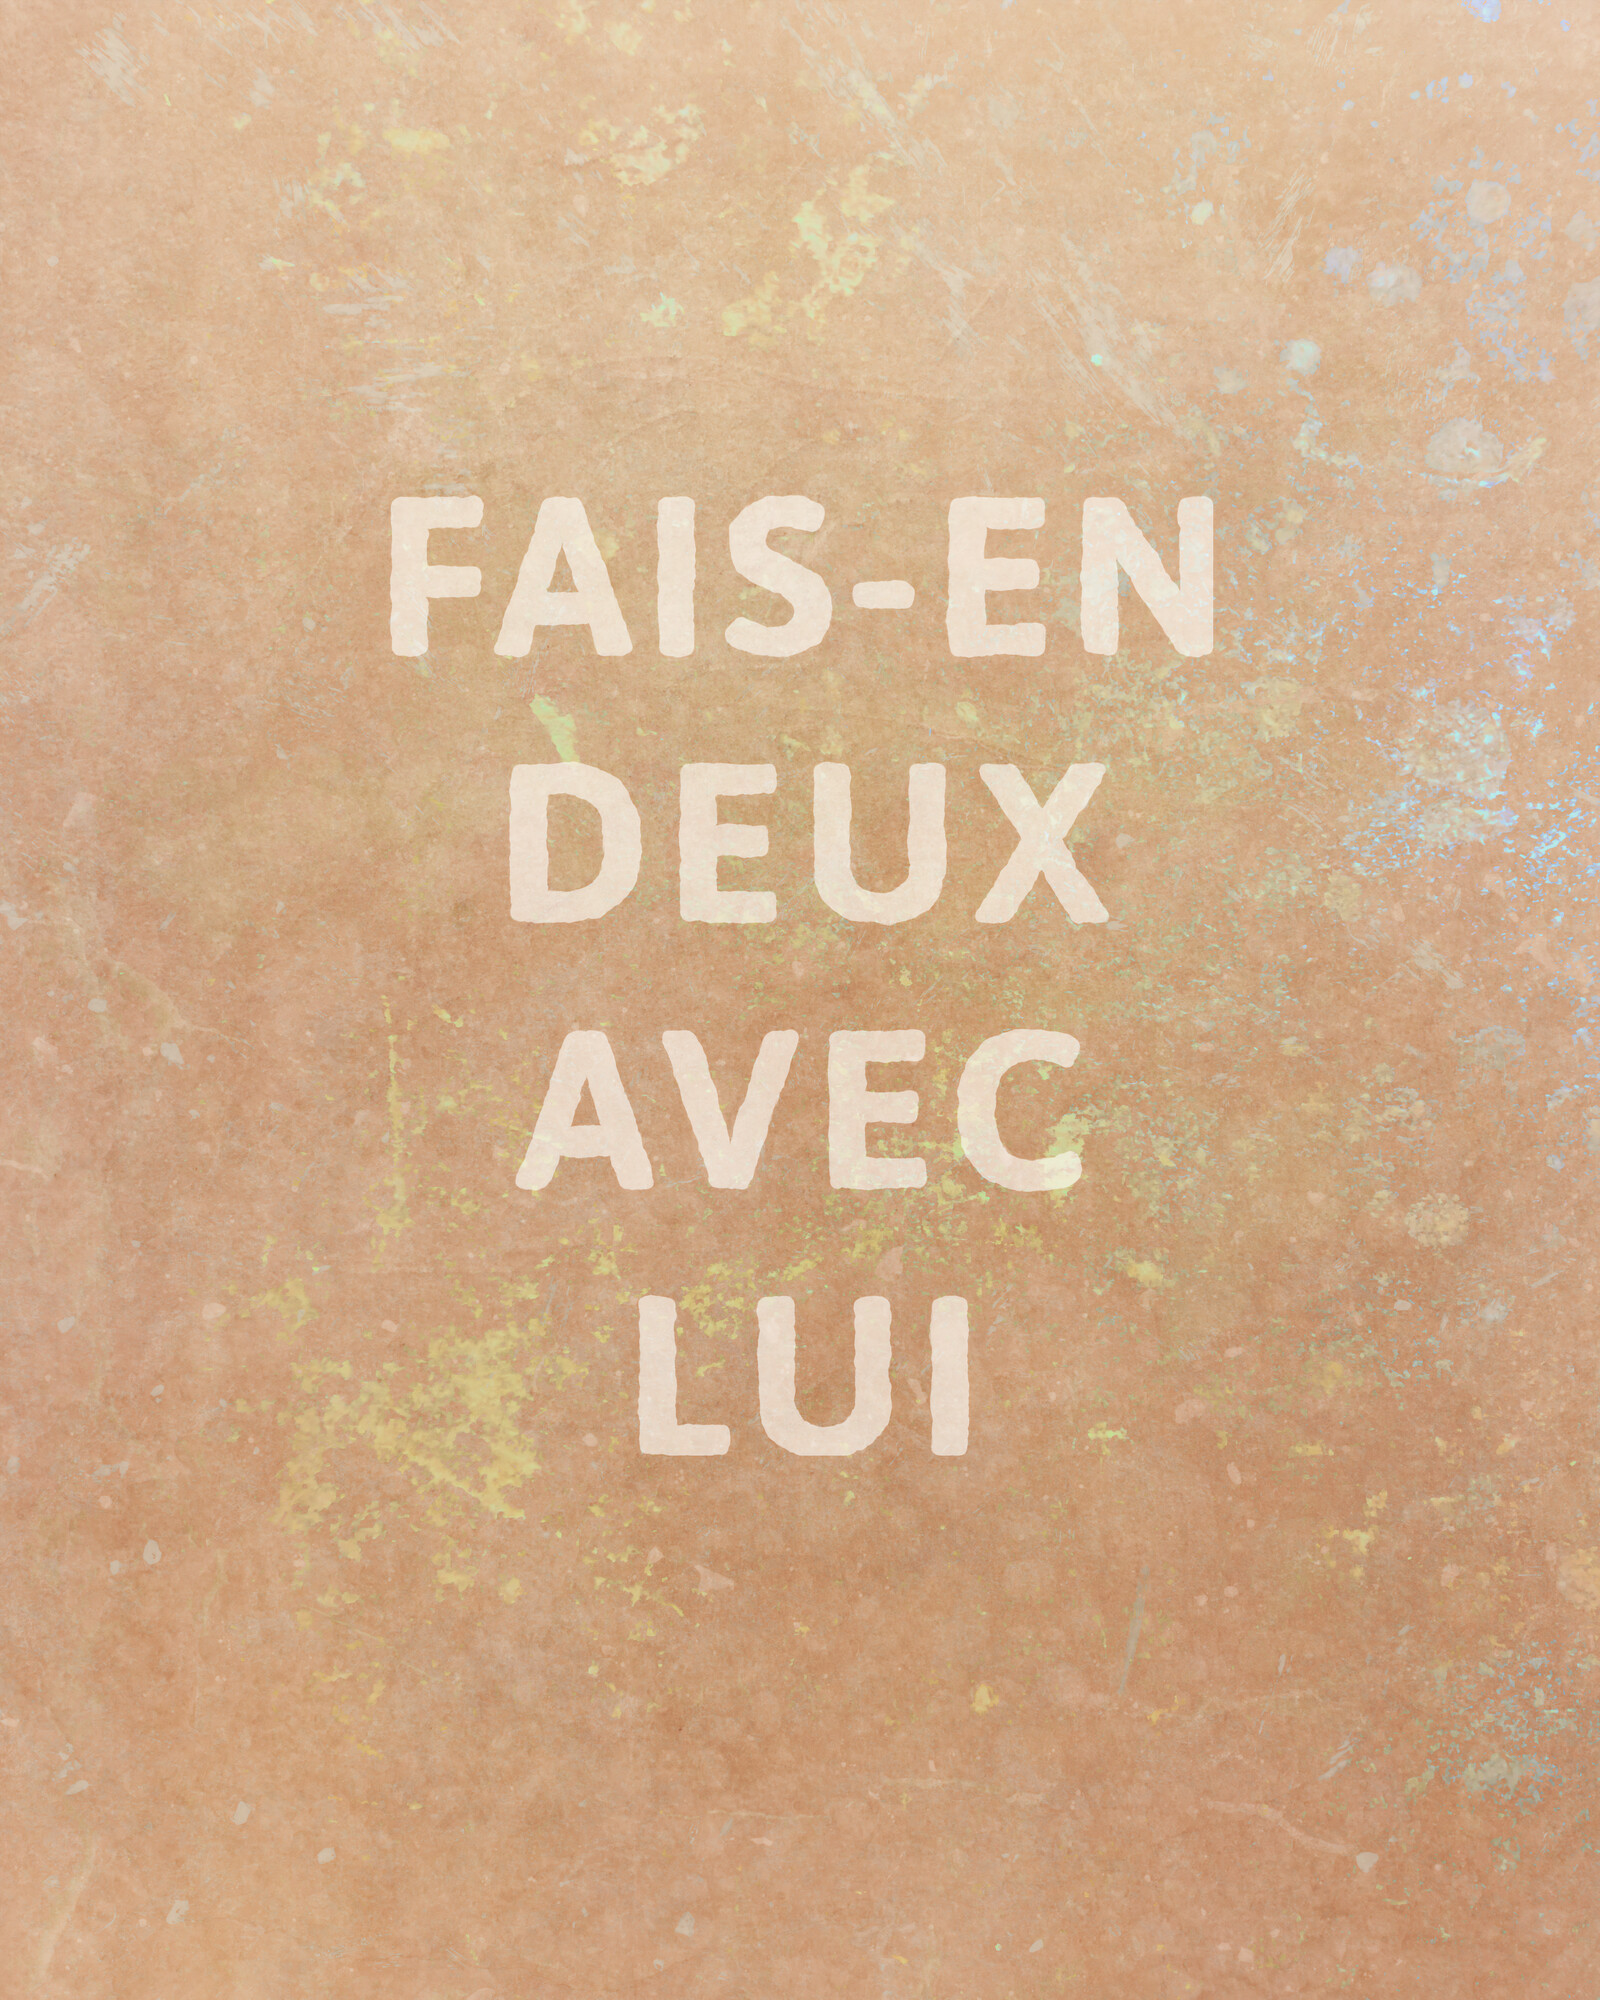 Art with the words "Fais-in deux avec lui" laid out vertically